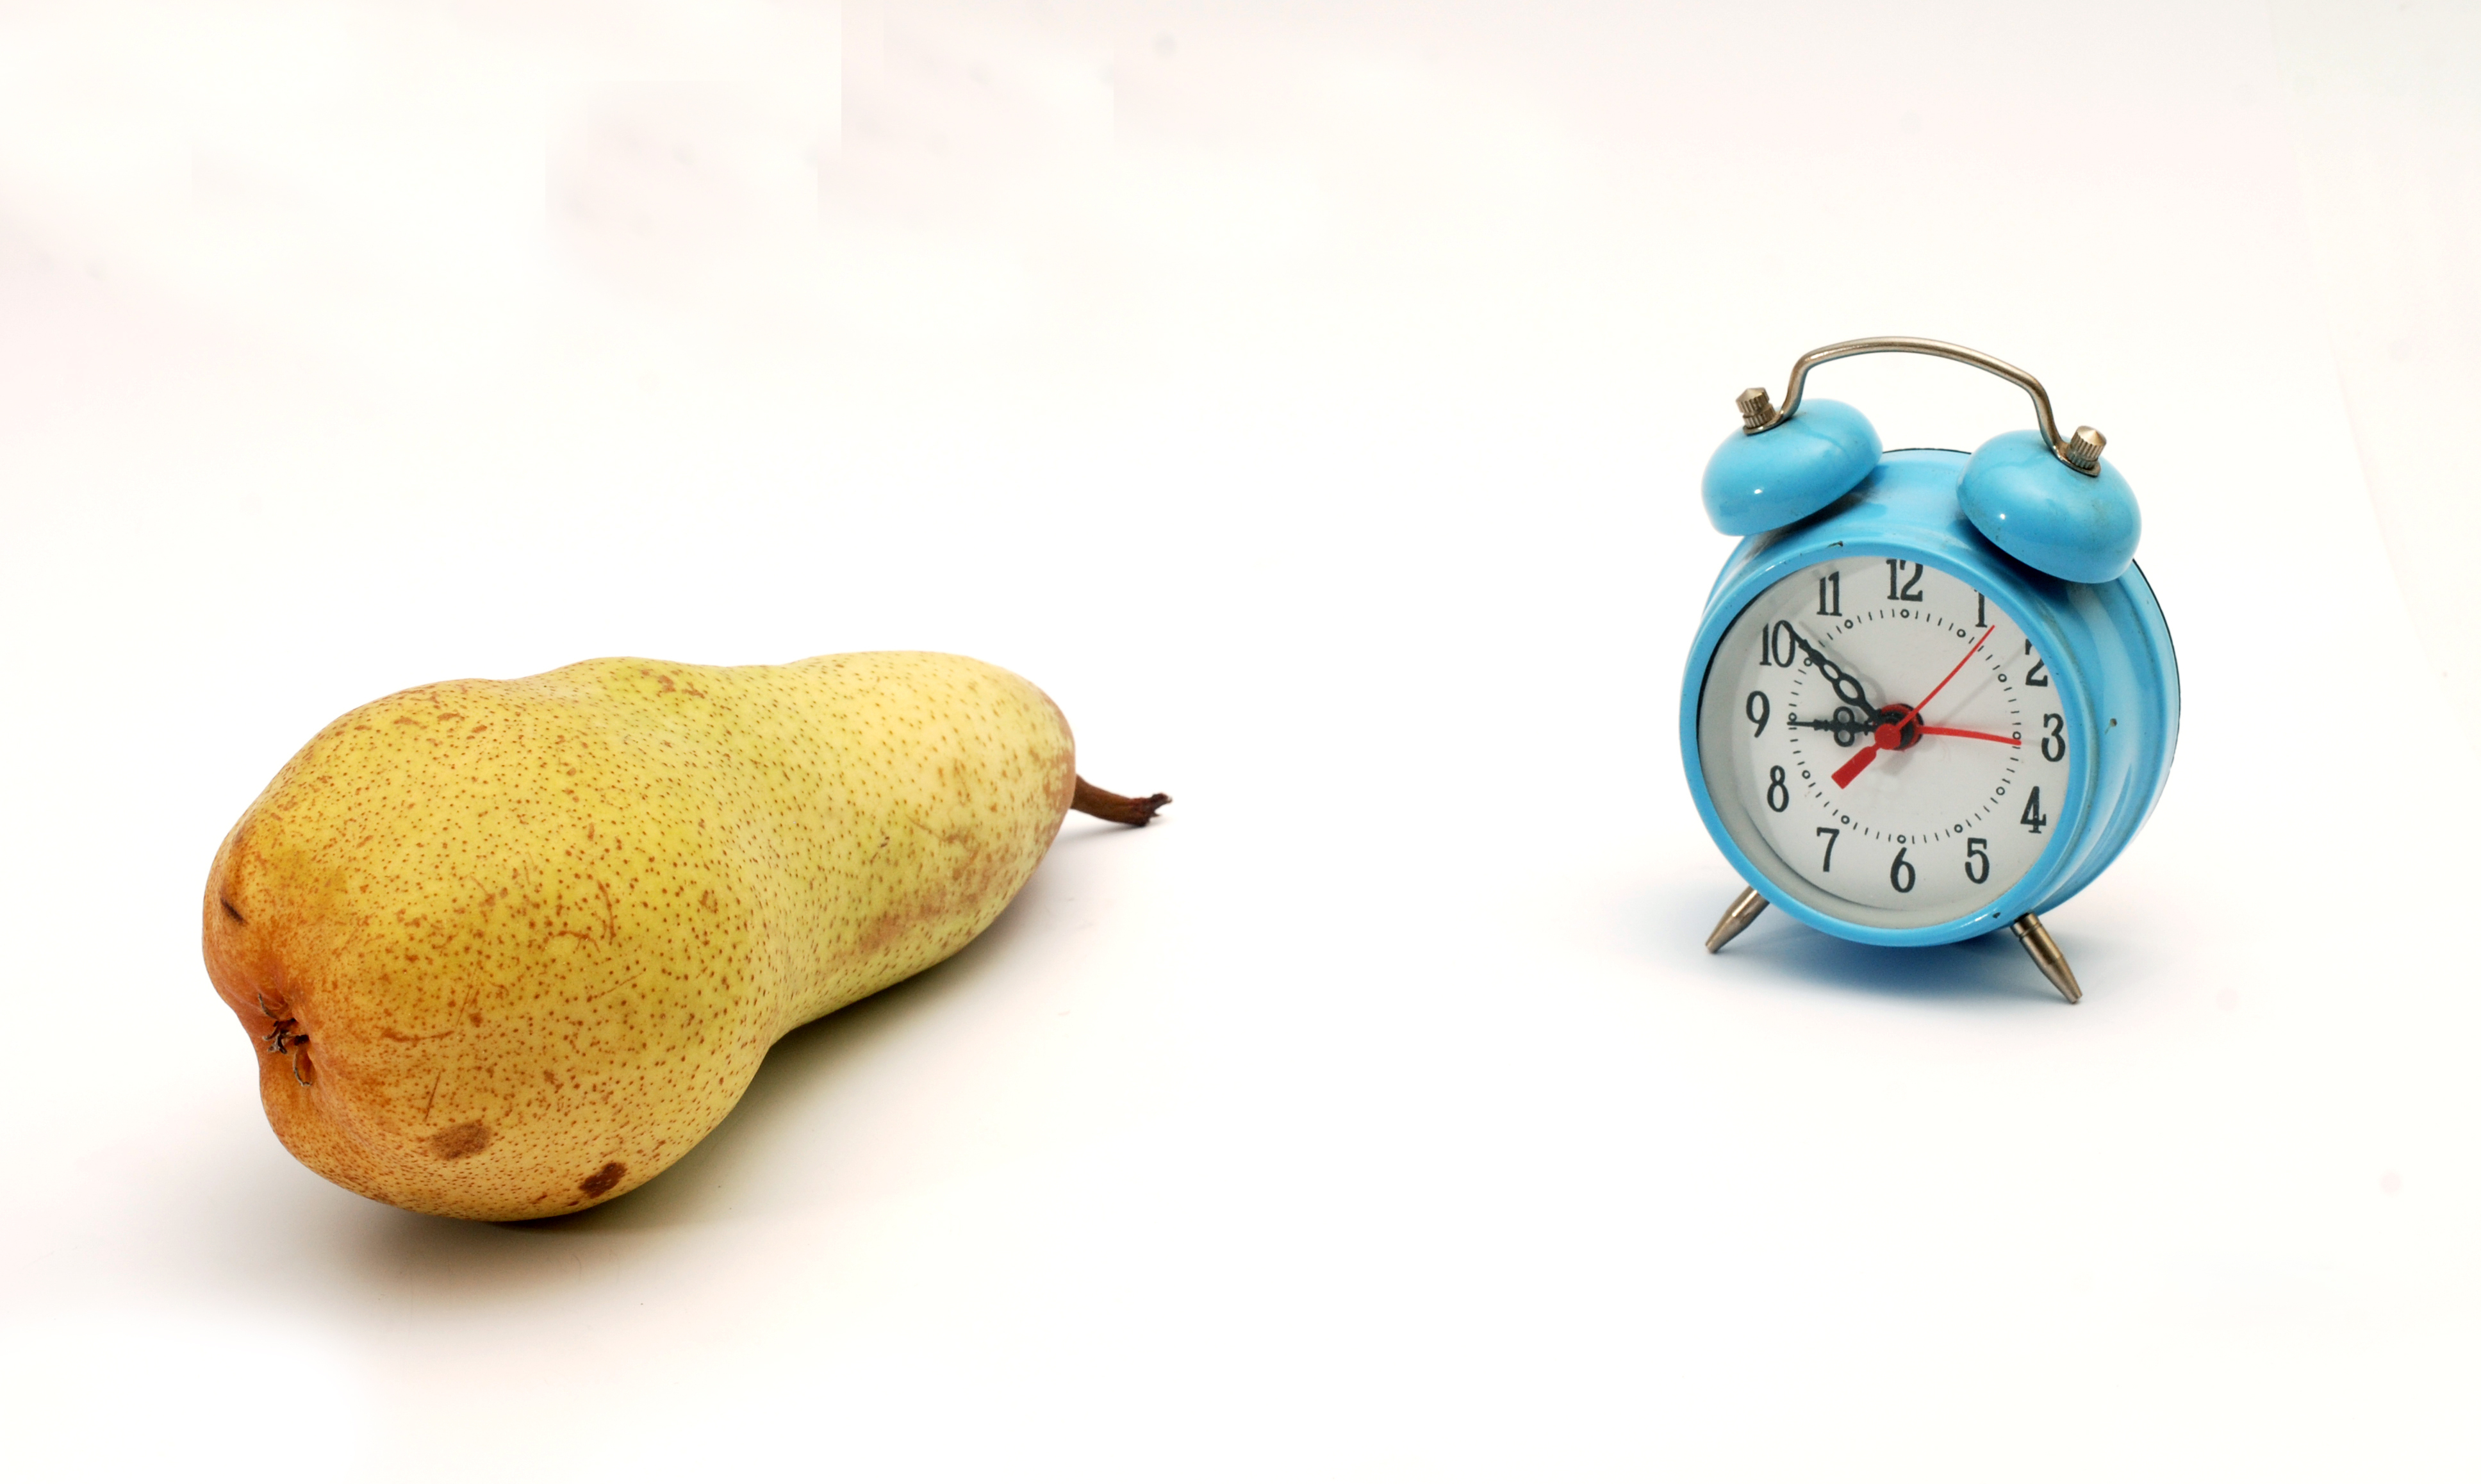 Pear and a clock on a white background.